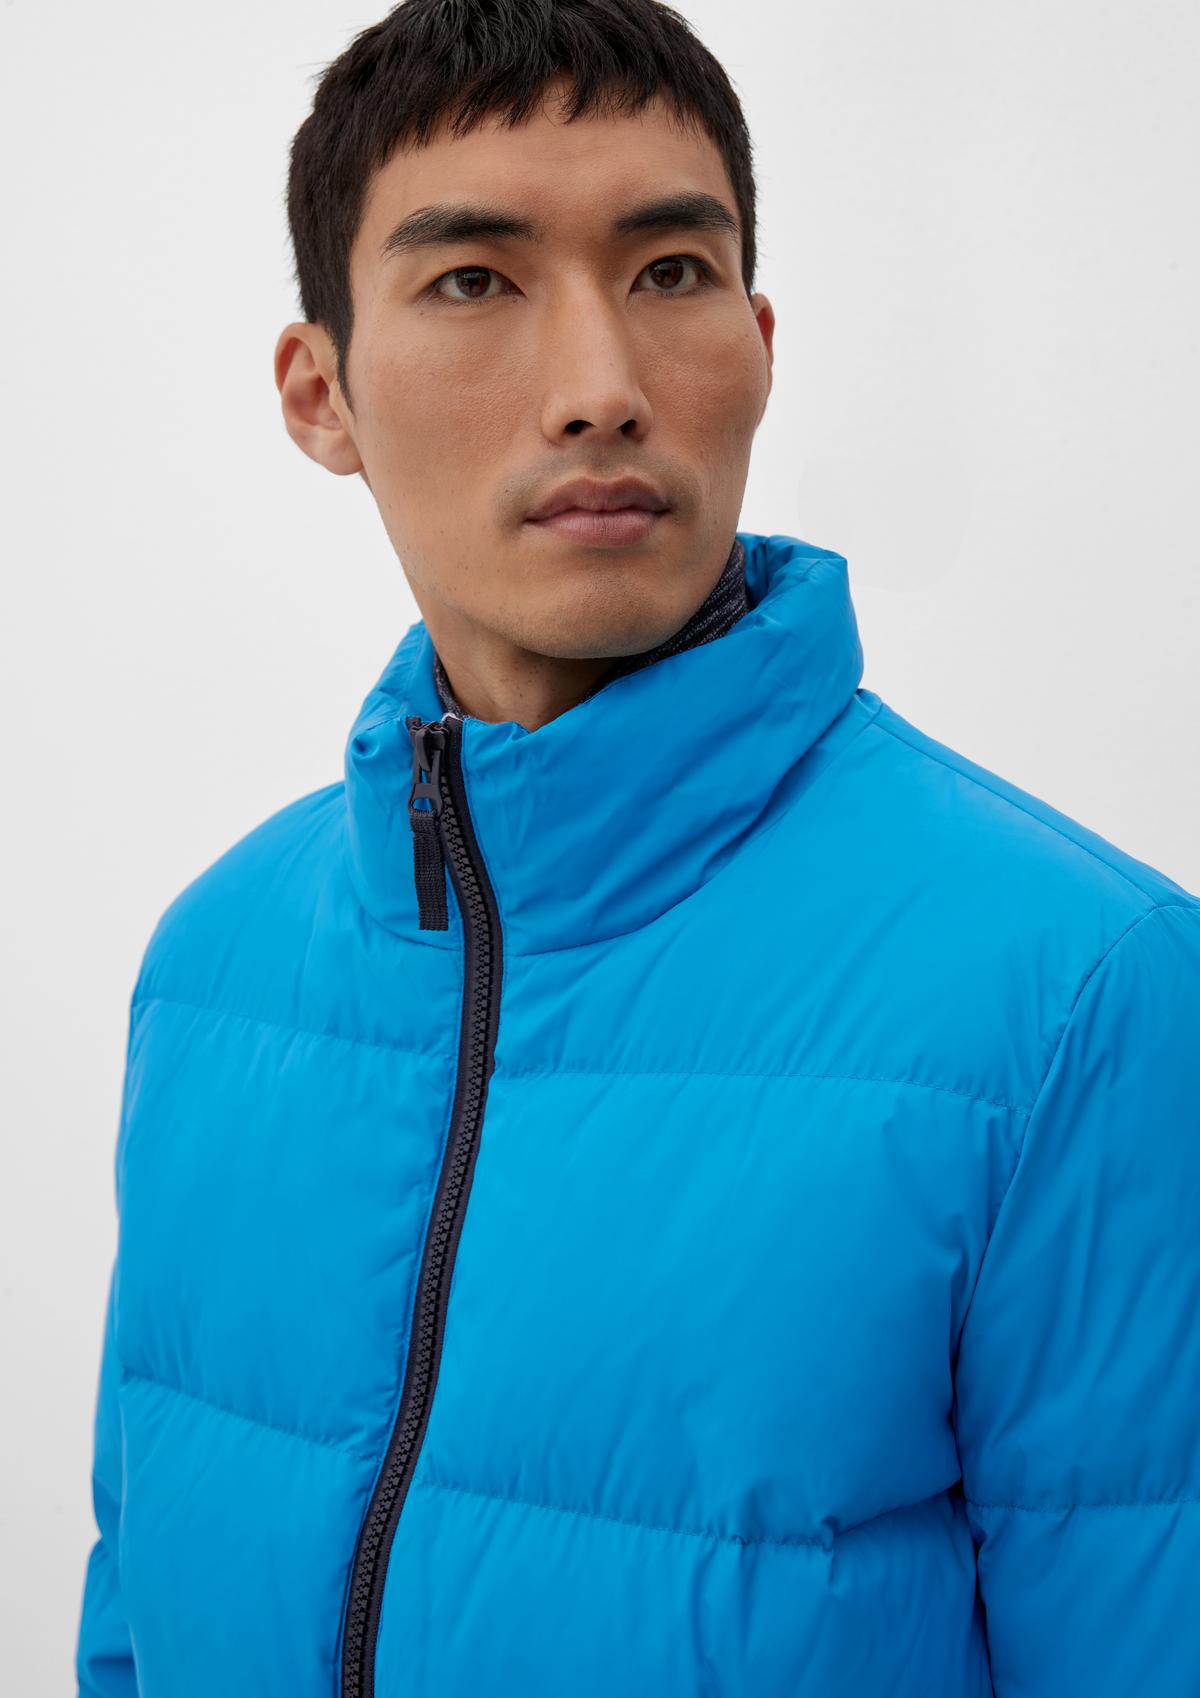 s.Oliver Down jacket with a stand-up collar